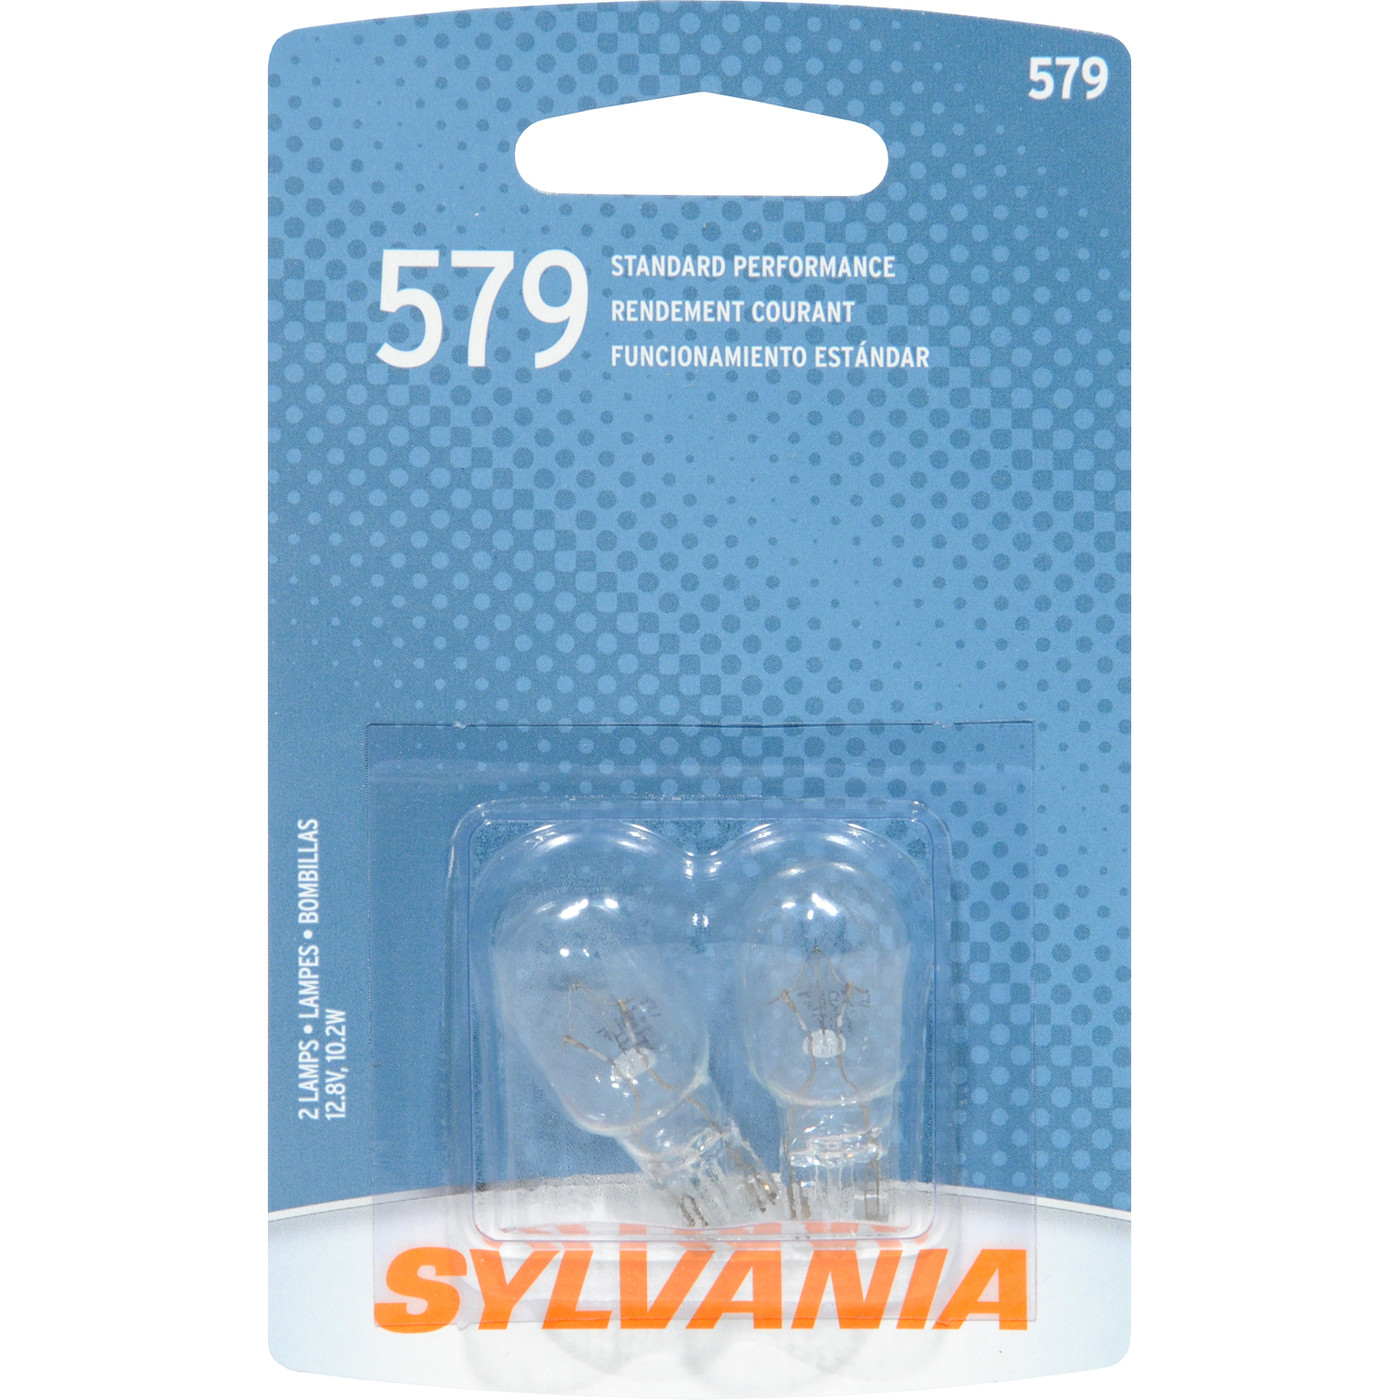 SYLVANIA RETAIL PACKS - Blister Pack Twin Trunk or Cargo Area Light - SYR 579.BP2